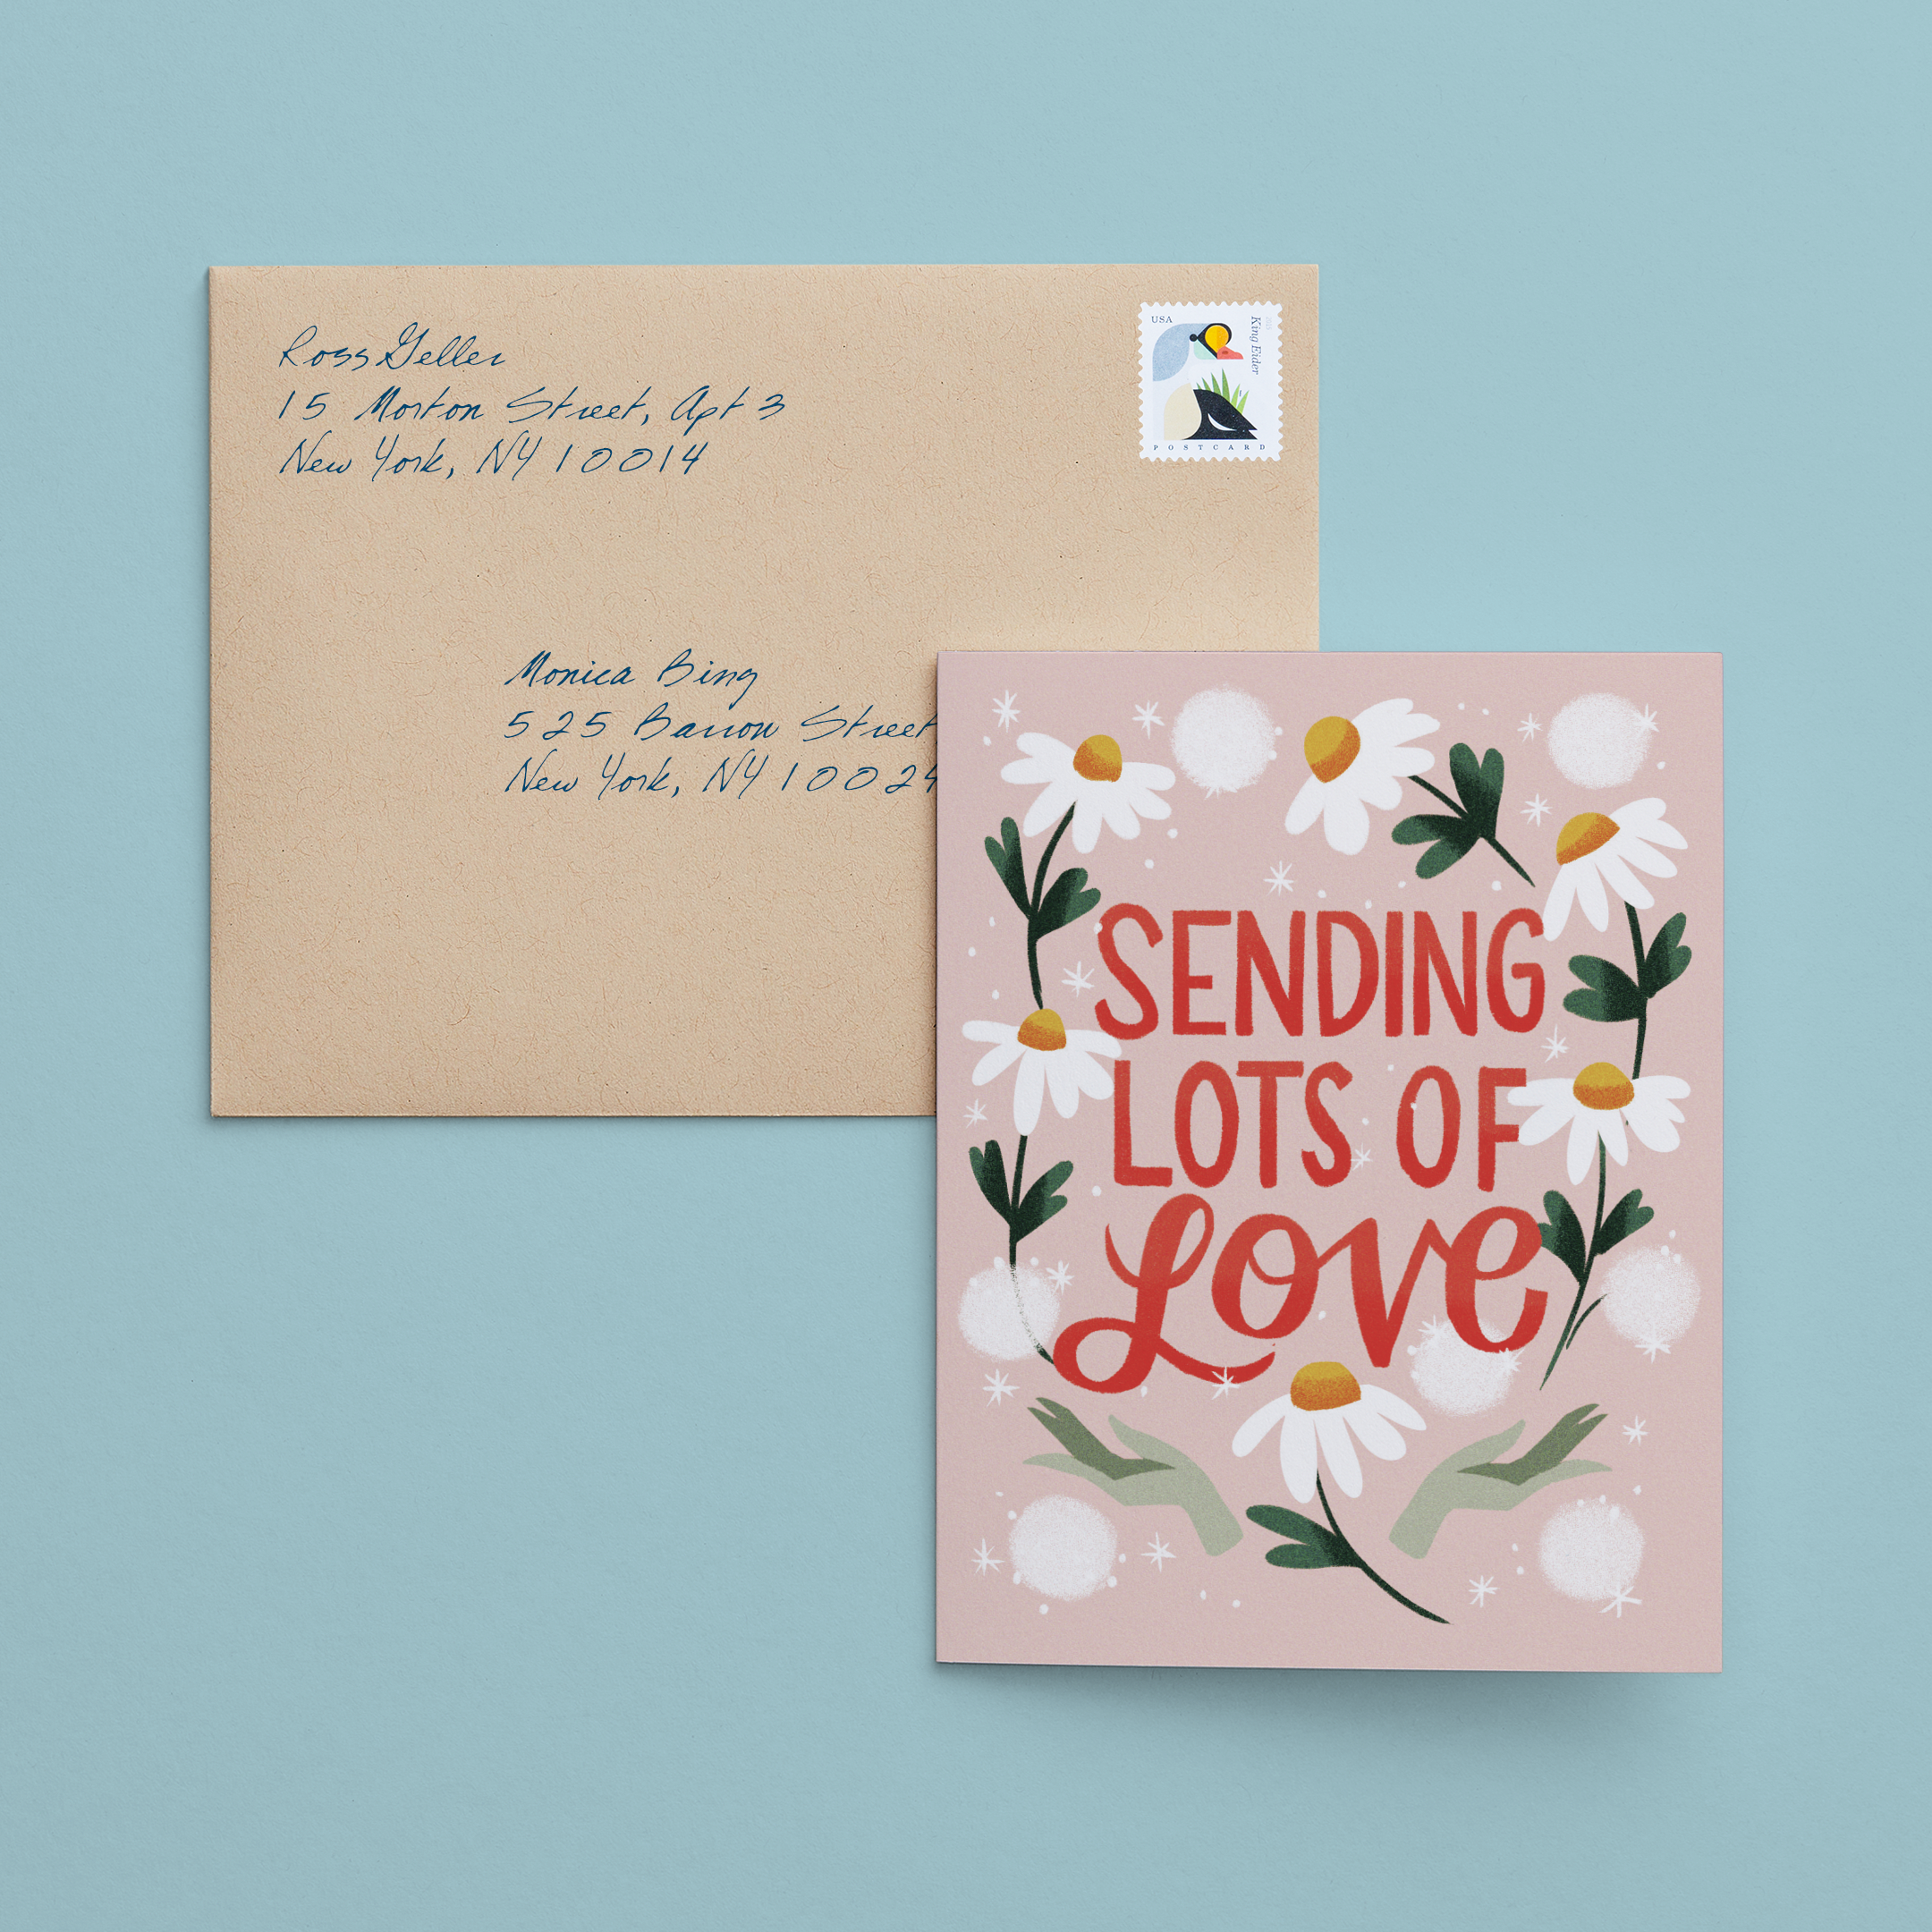 Monica  Flowers & Hearts - Greetings Cards for Love for Monica 